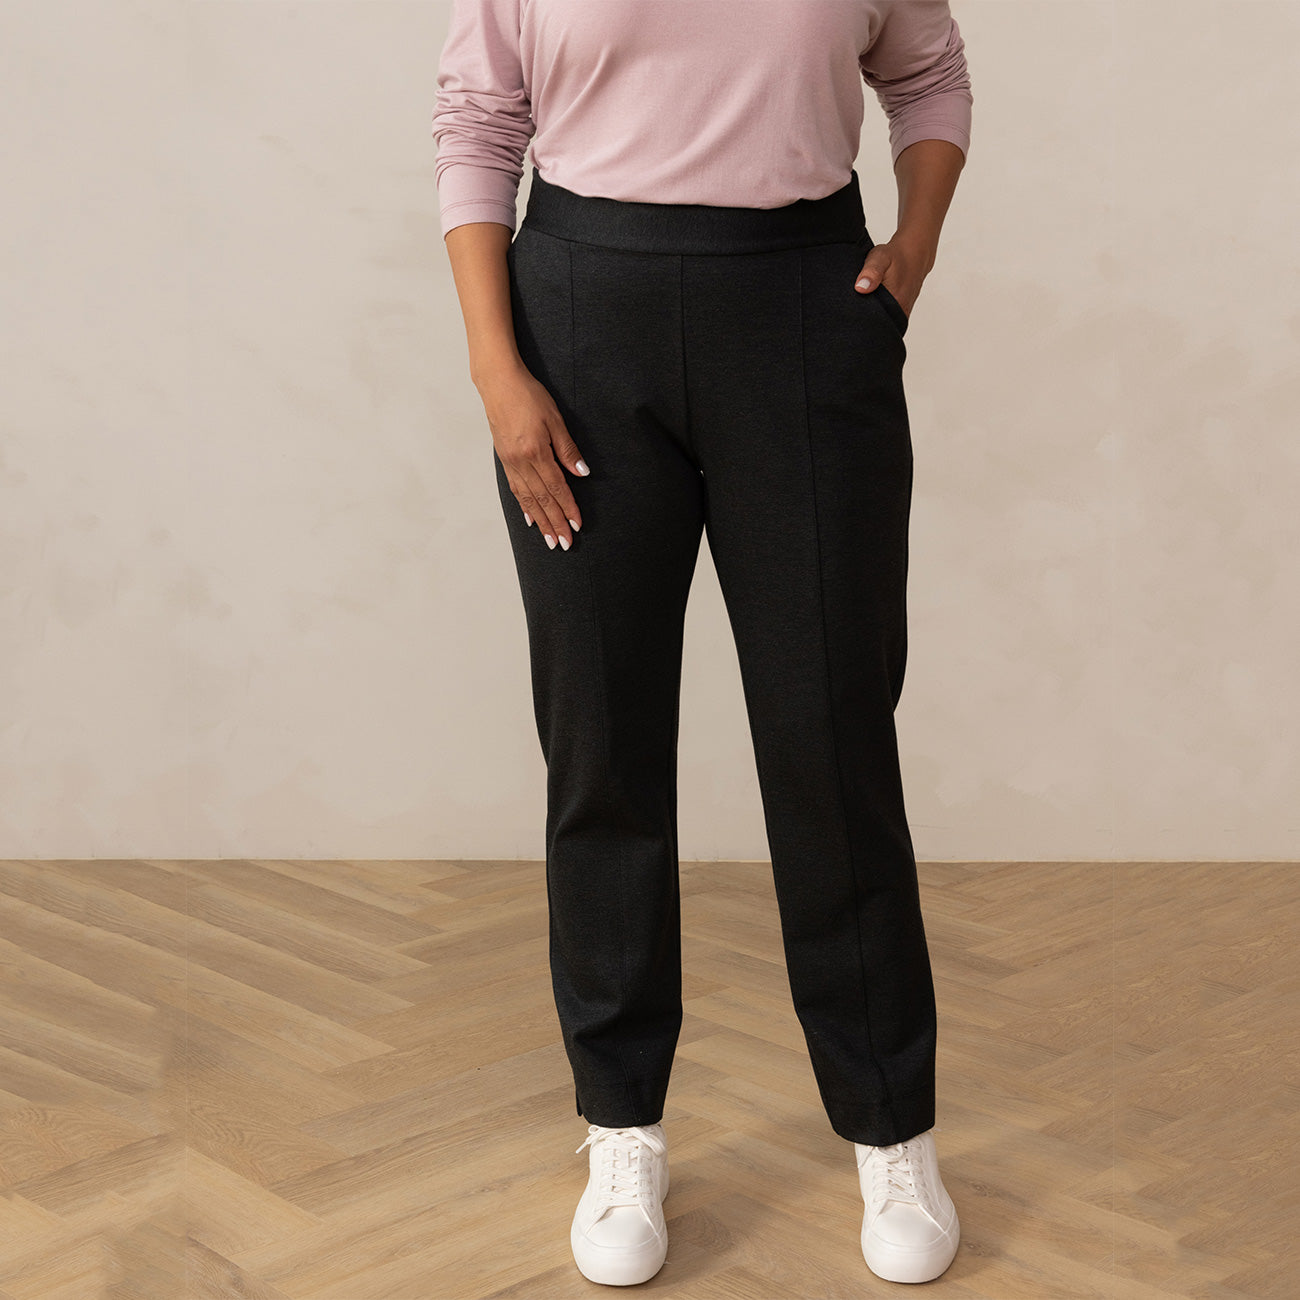 High-waisted tailored trousers - Navy blue - Ladies